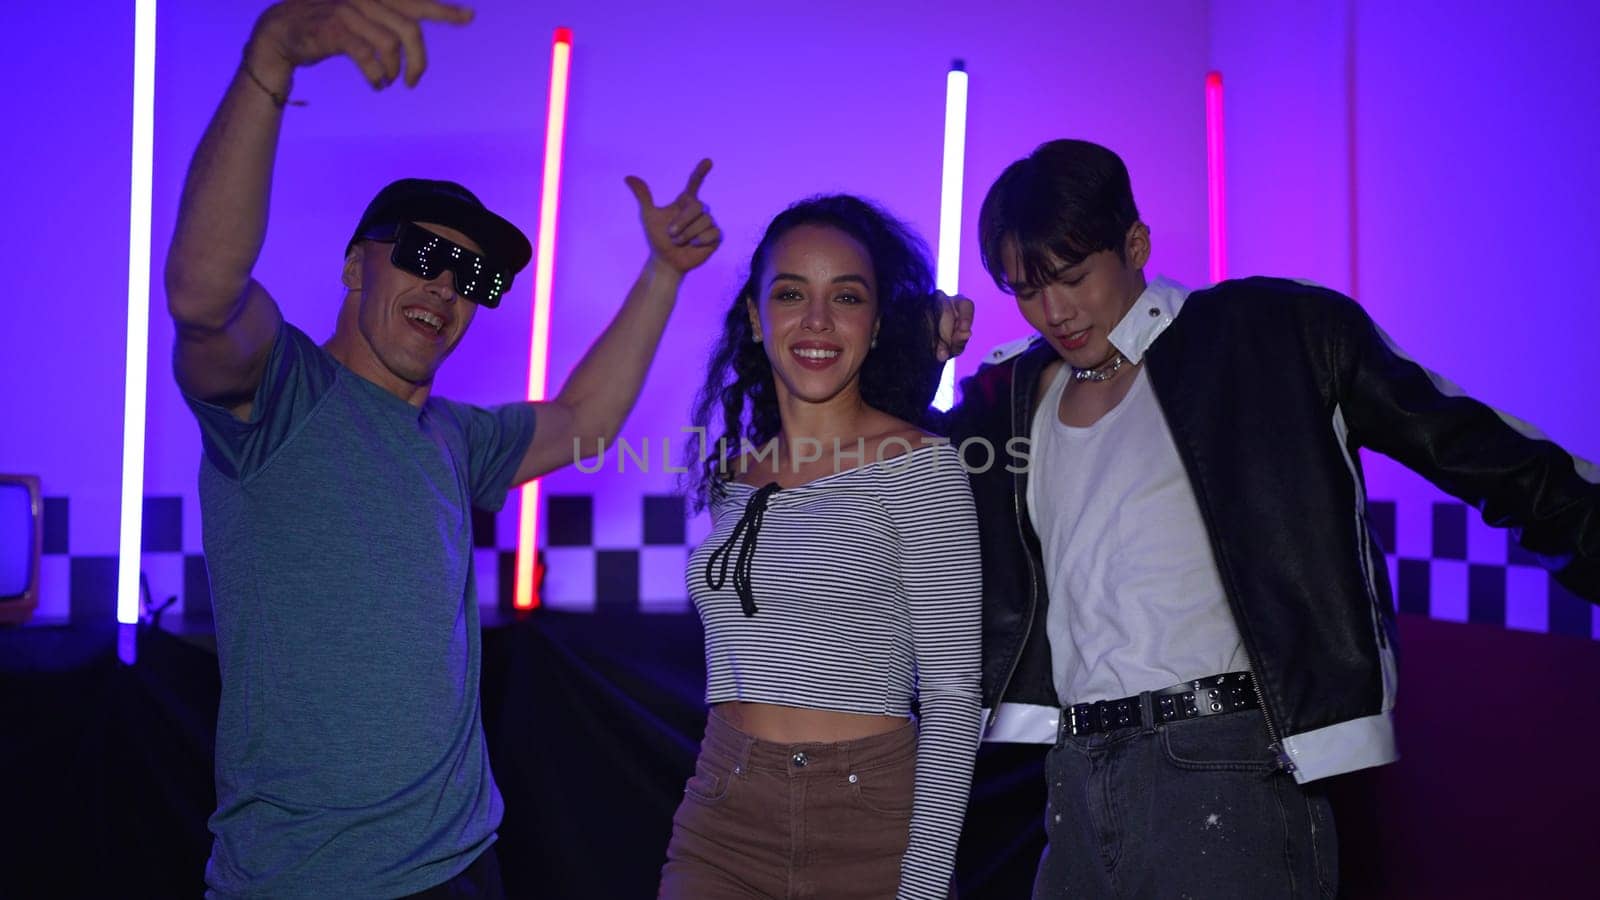 Diverse street dancer moving to city pop music at party with neon light while man wearing fancy glasses. Attractive hipster perform or practicing dancing together while looking at camera. Regalement.